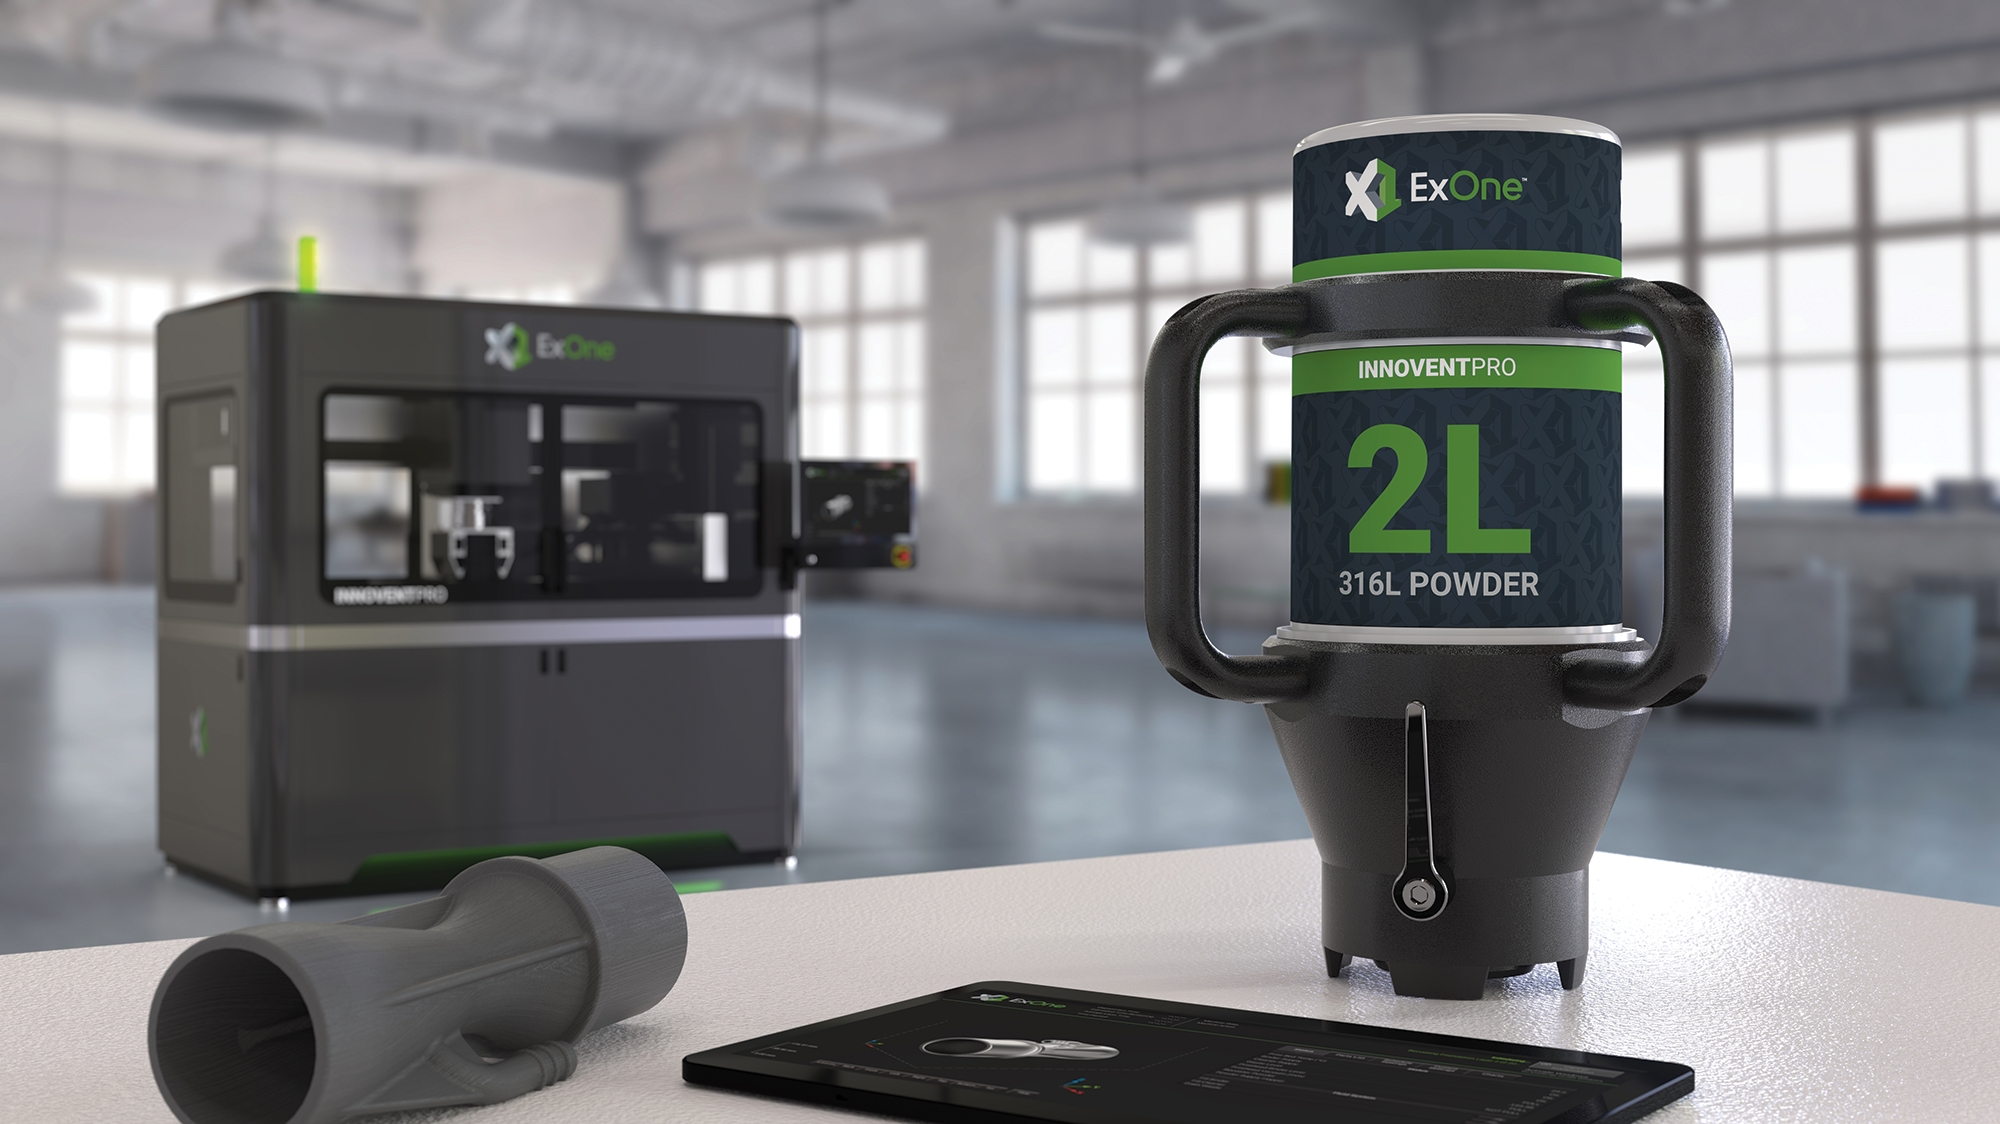 ExOne announces first InnoventPro 3D printer orders, new X1 Powder Grip device, and Desktop Metal acquisition approval